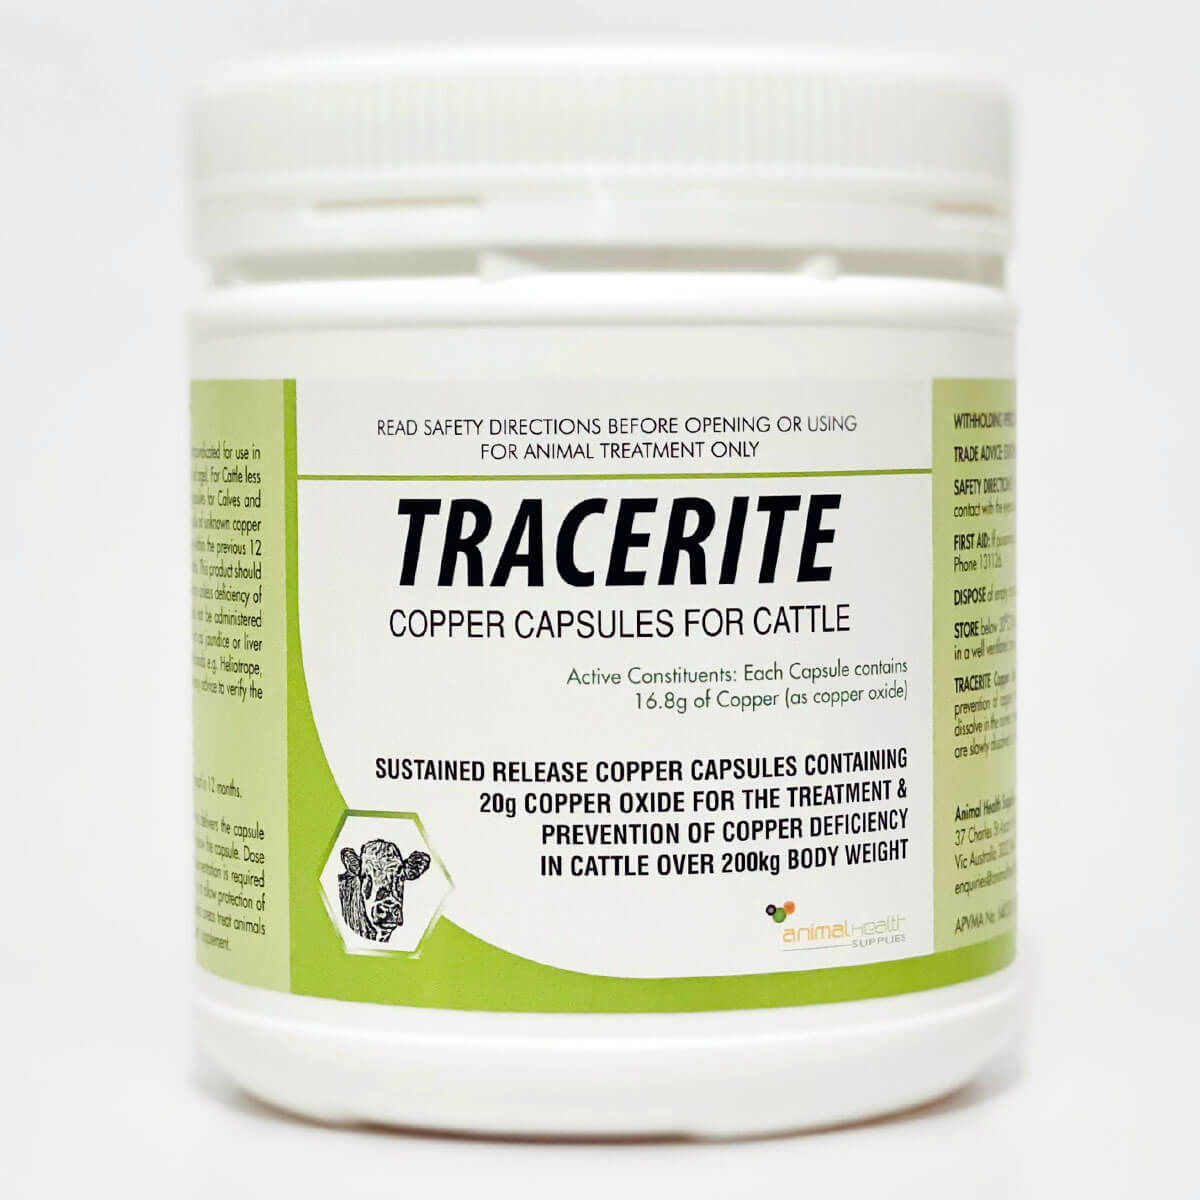 Tracerite Copper Capsules for Cattle (20g) - Animal Health Supplies